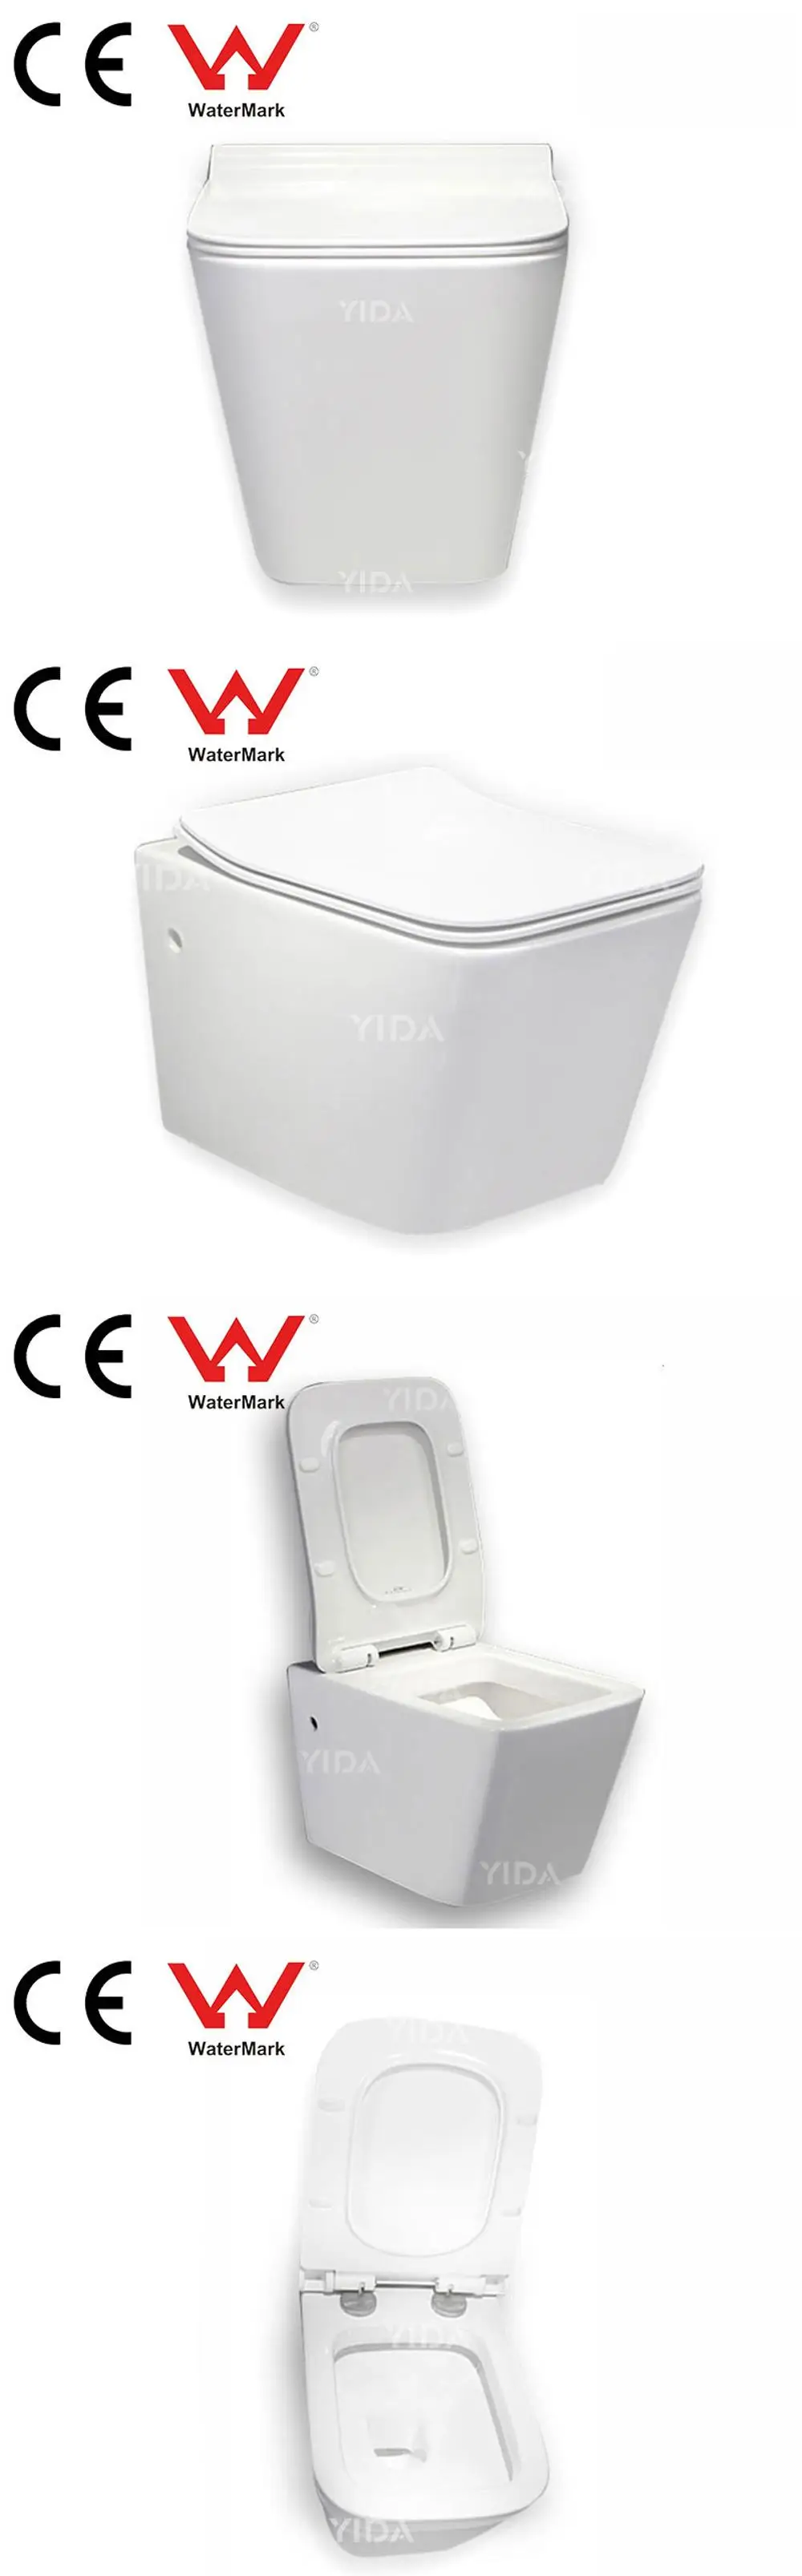 factory export to Italy,Netherlands Europe country ceramic wall hung toilet bowl,high quality sanitary ware hanging toilet wc